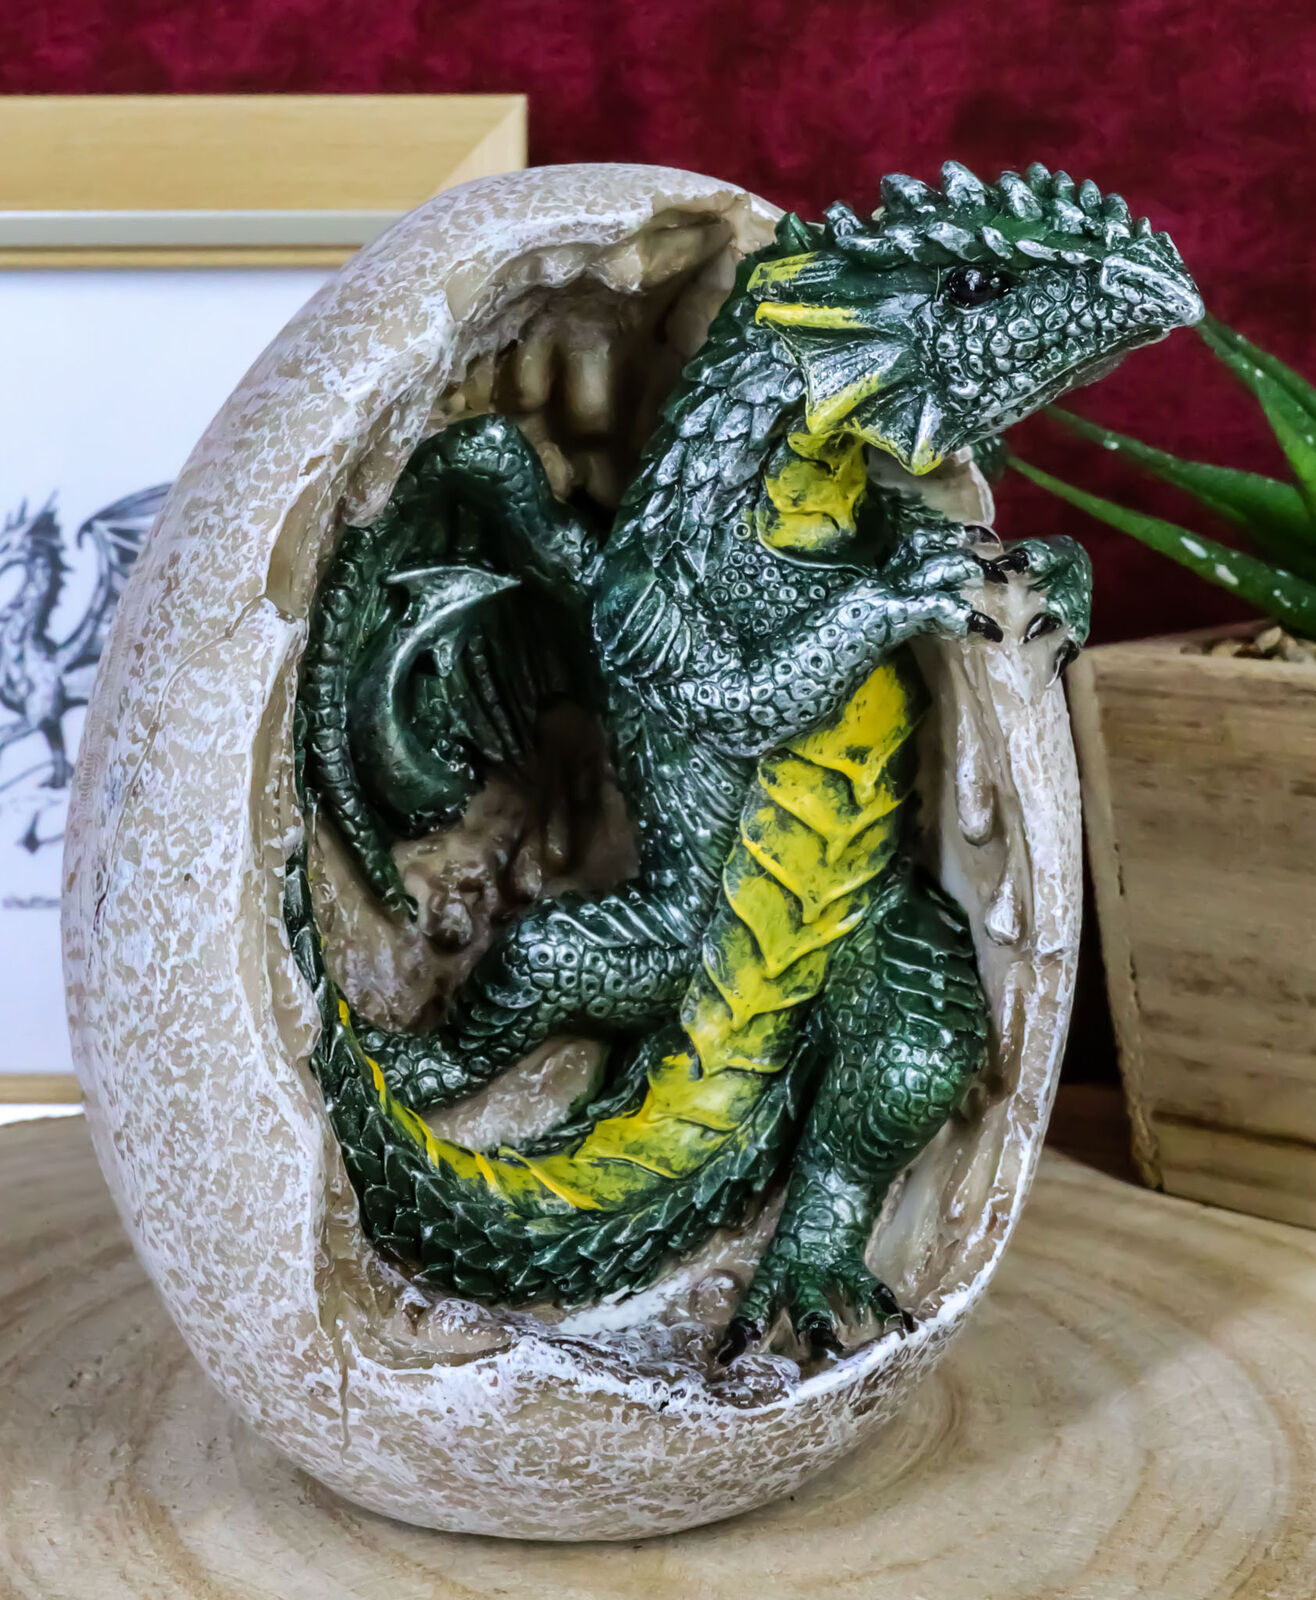 Ebros Green Earth Dragon Hatchling Breaking Out of Egg Shell Figurine 5